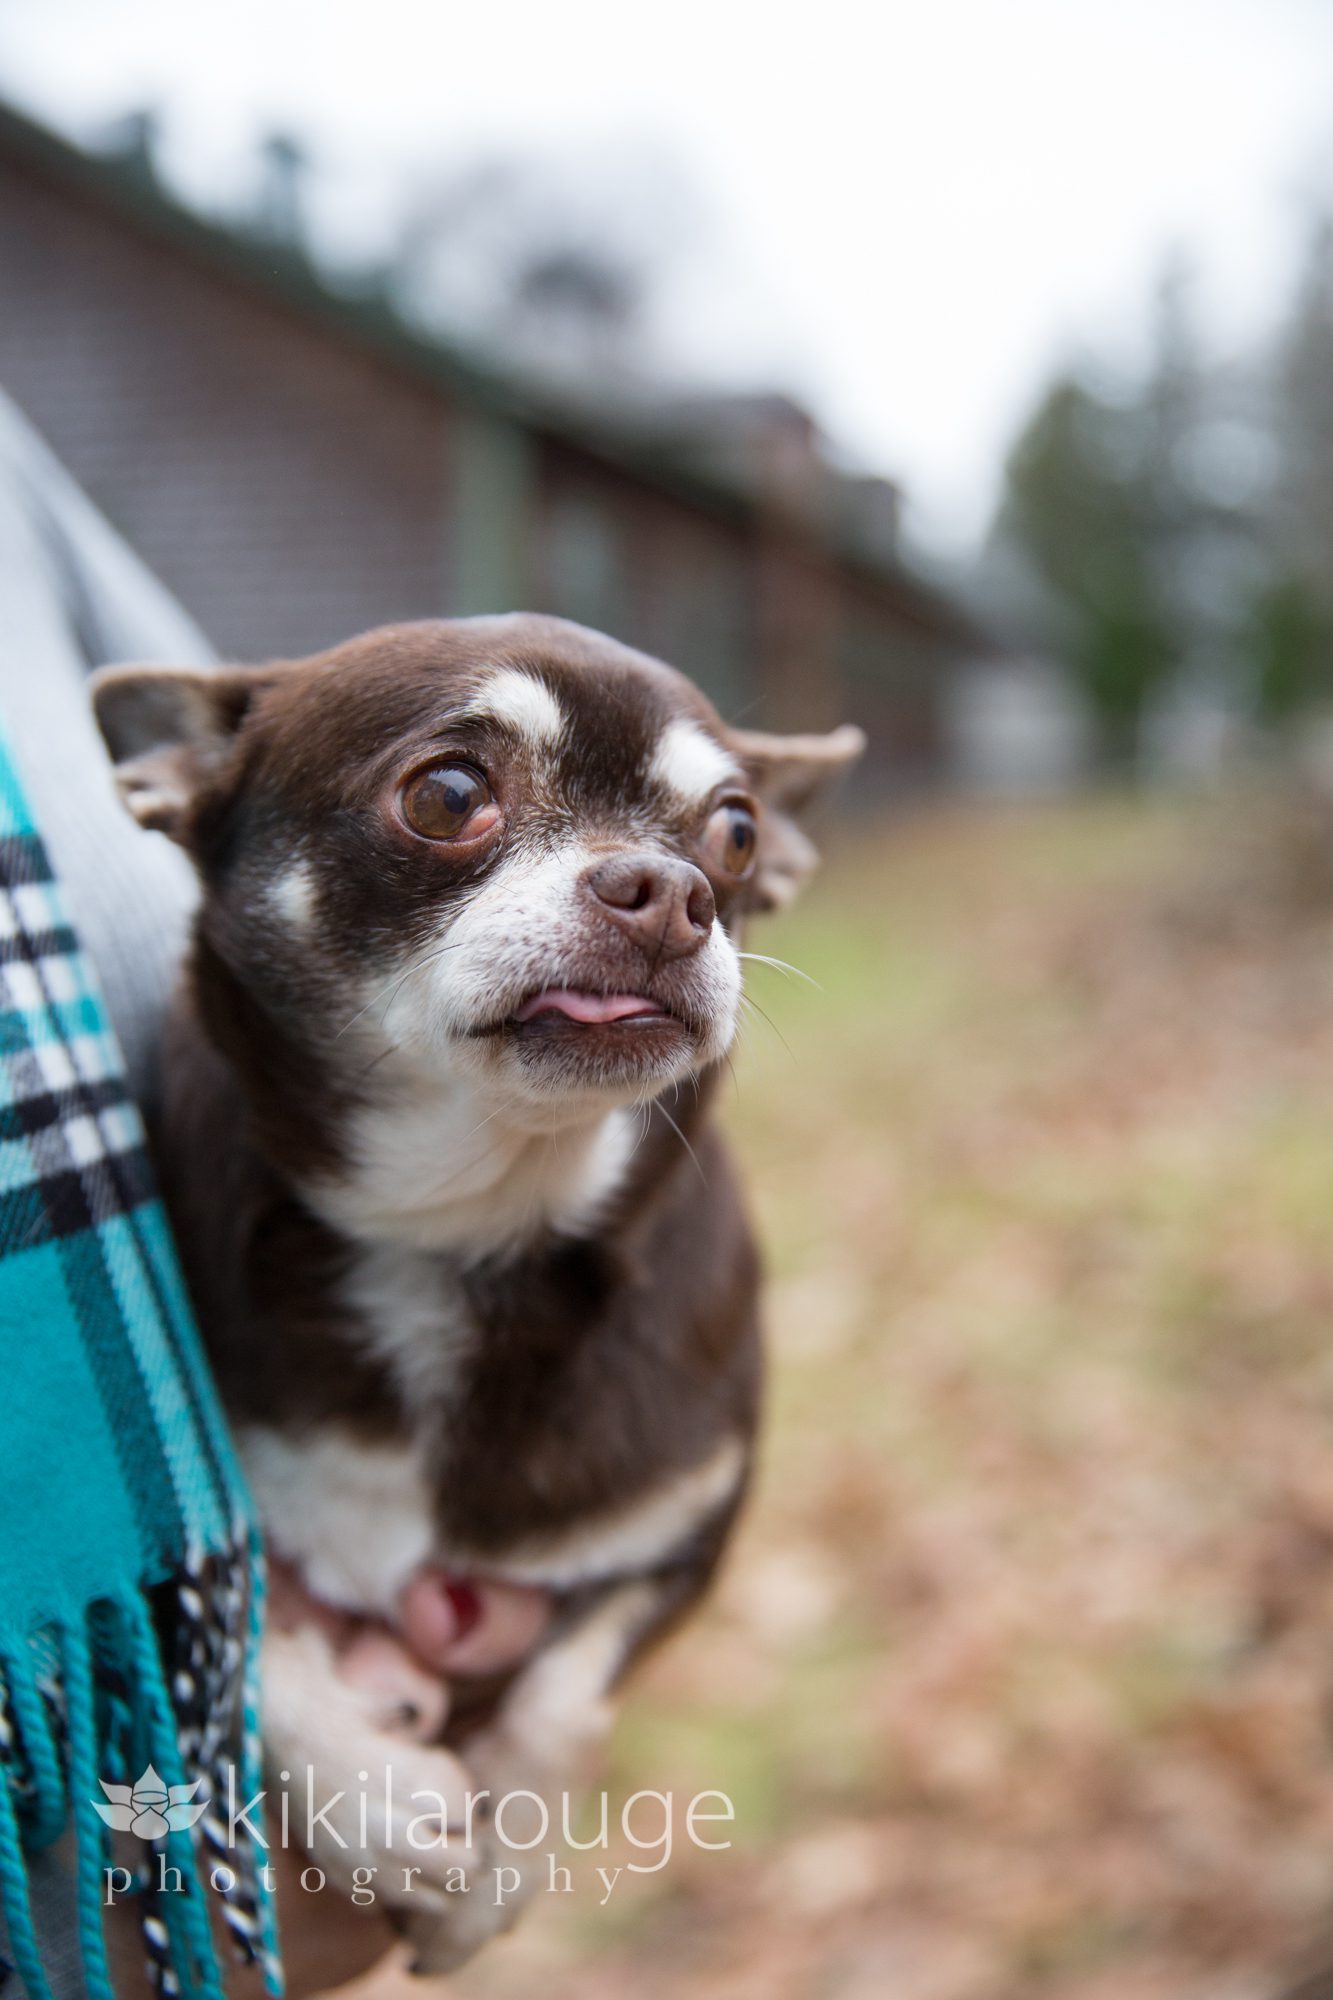 Brown chihuahua with tongue out